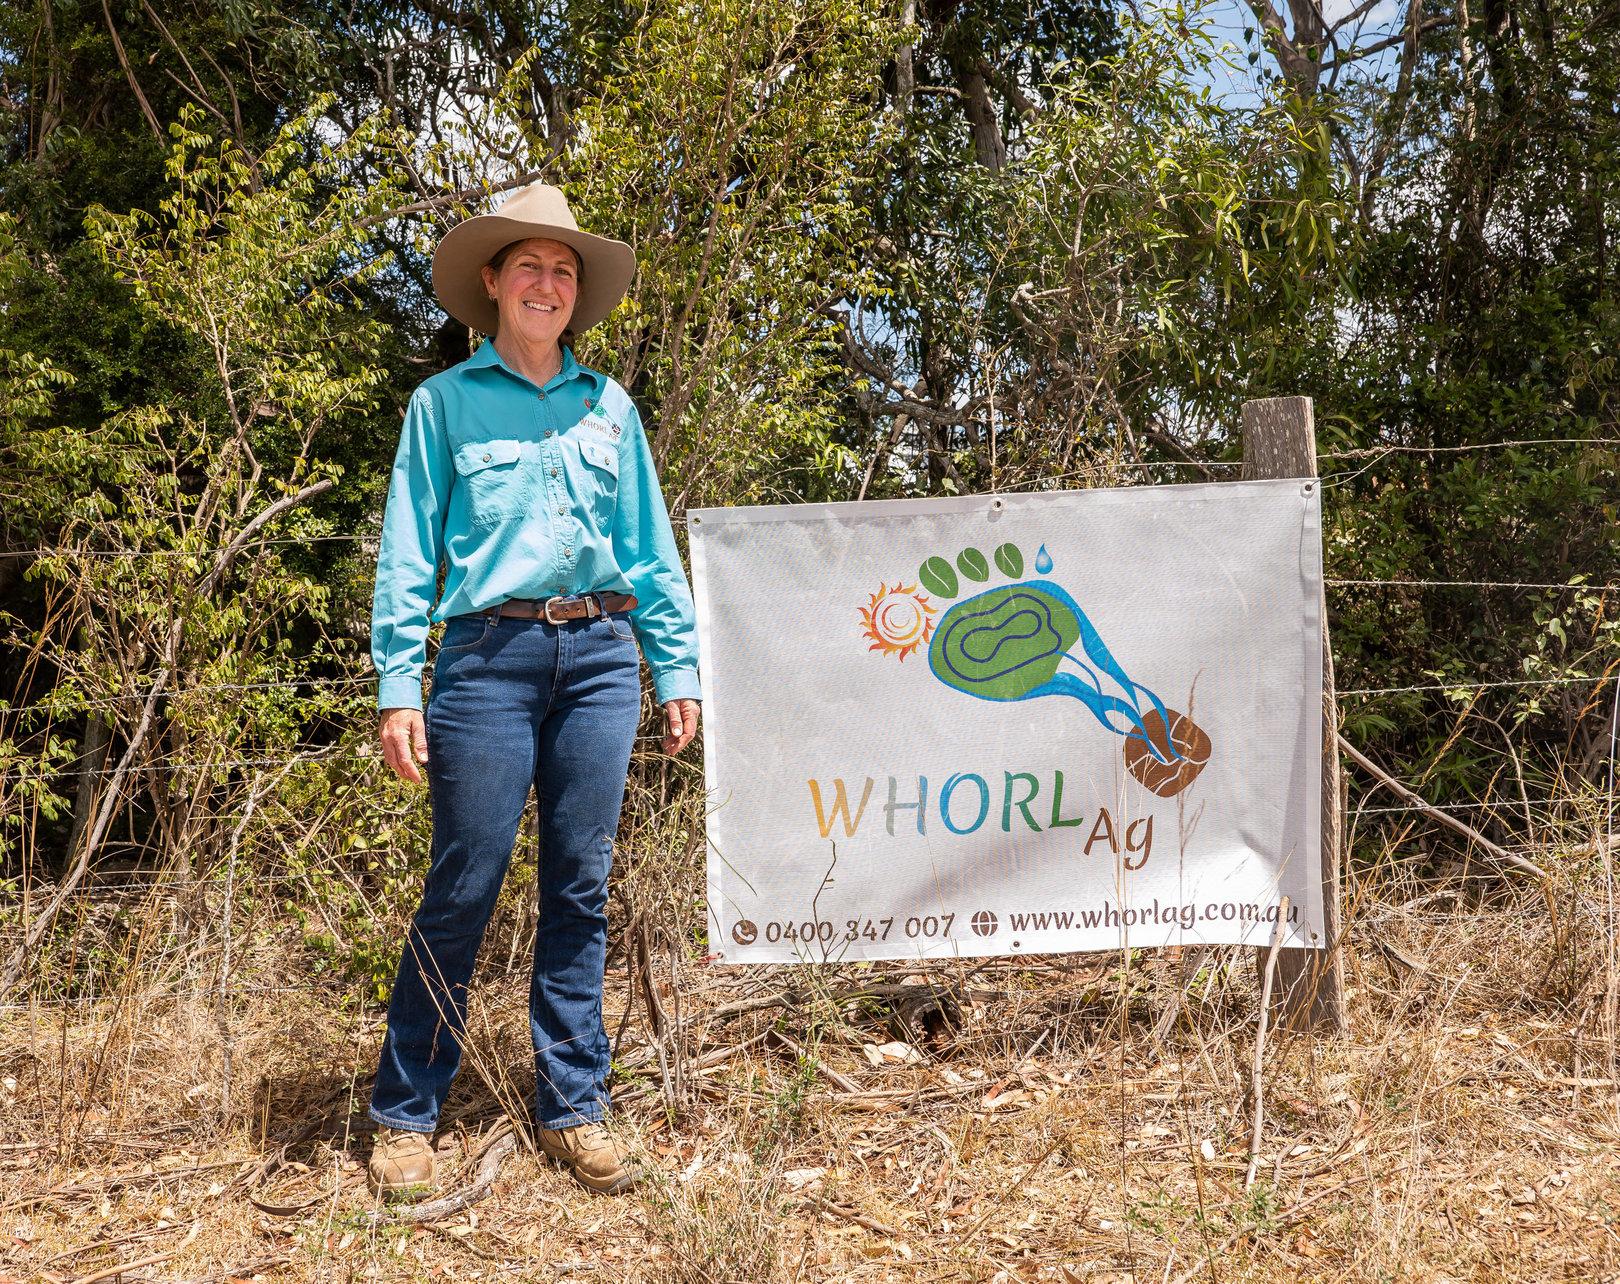 Marcia stands in front of a Whorl Ag sign hanging from a wire fence. The fence is in a brown paddock against bushy trees.